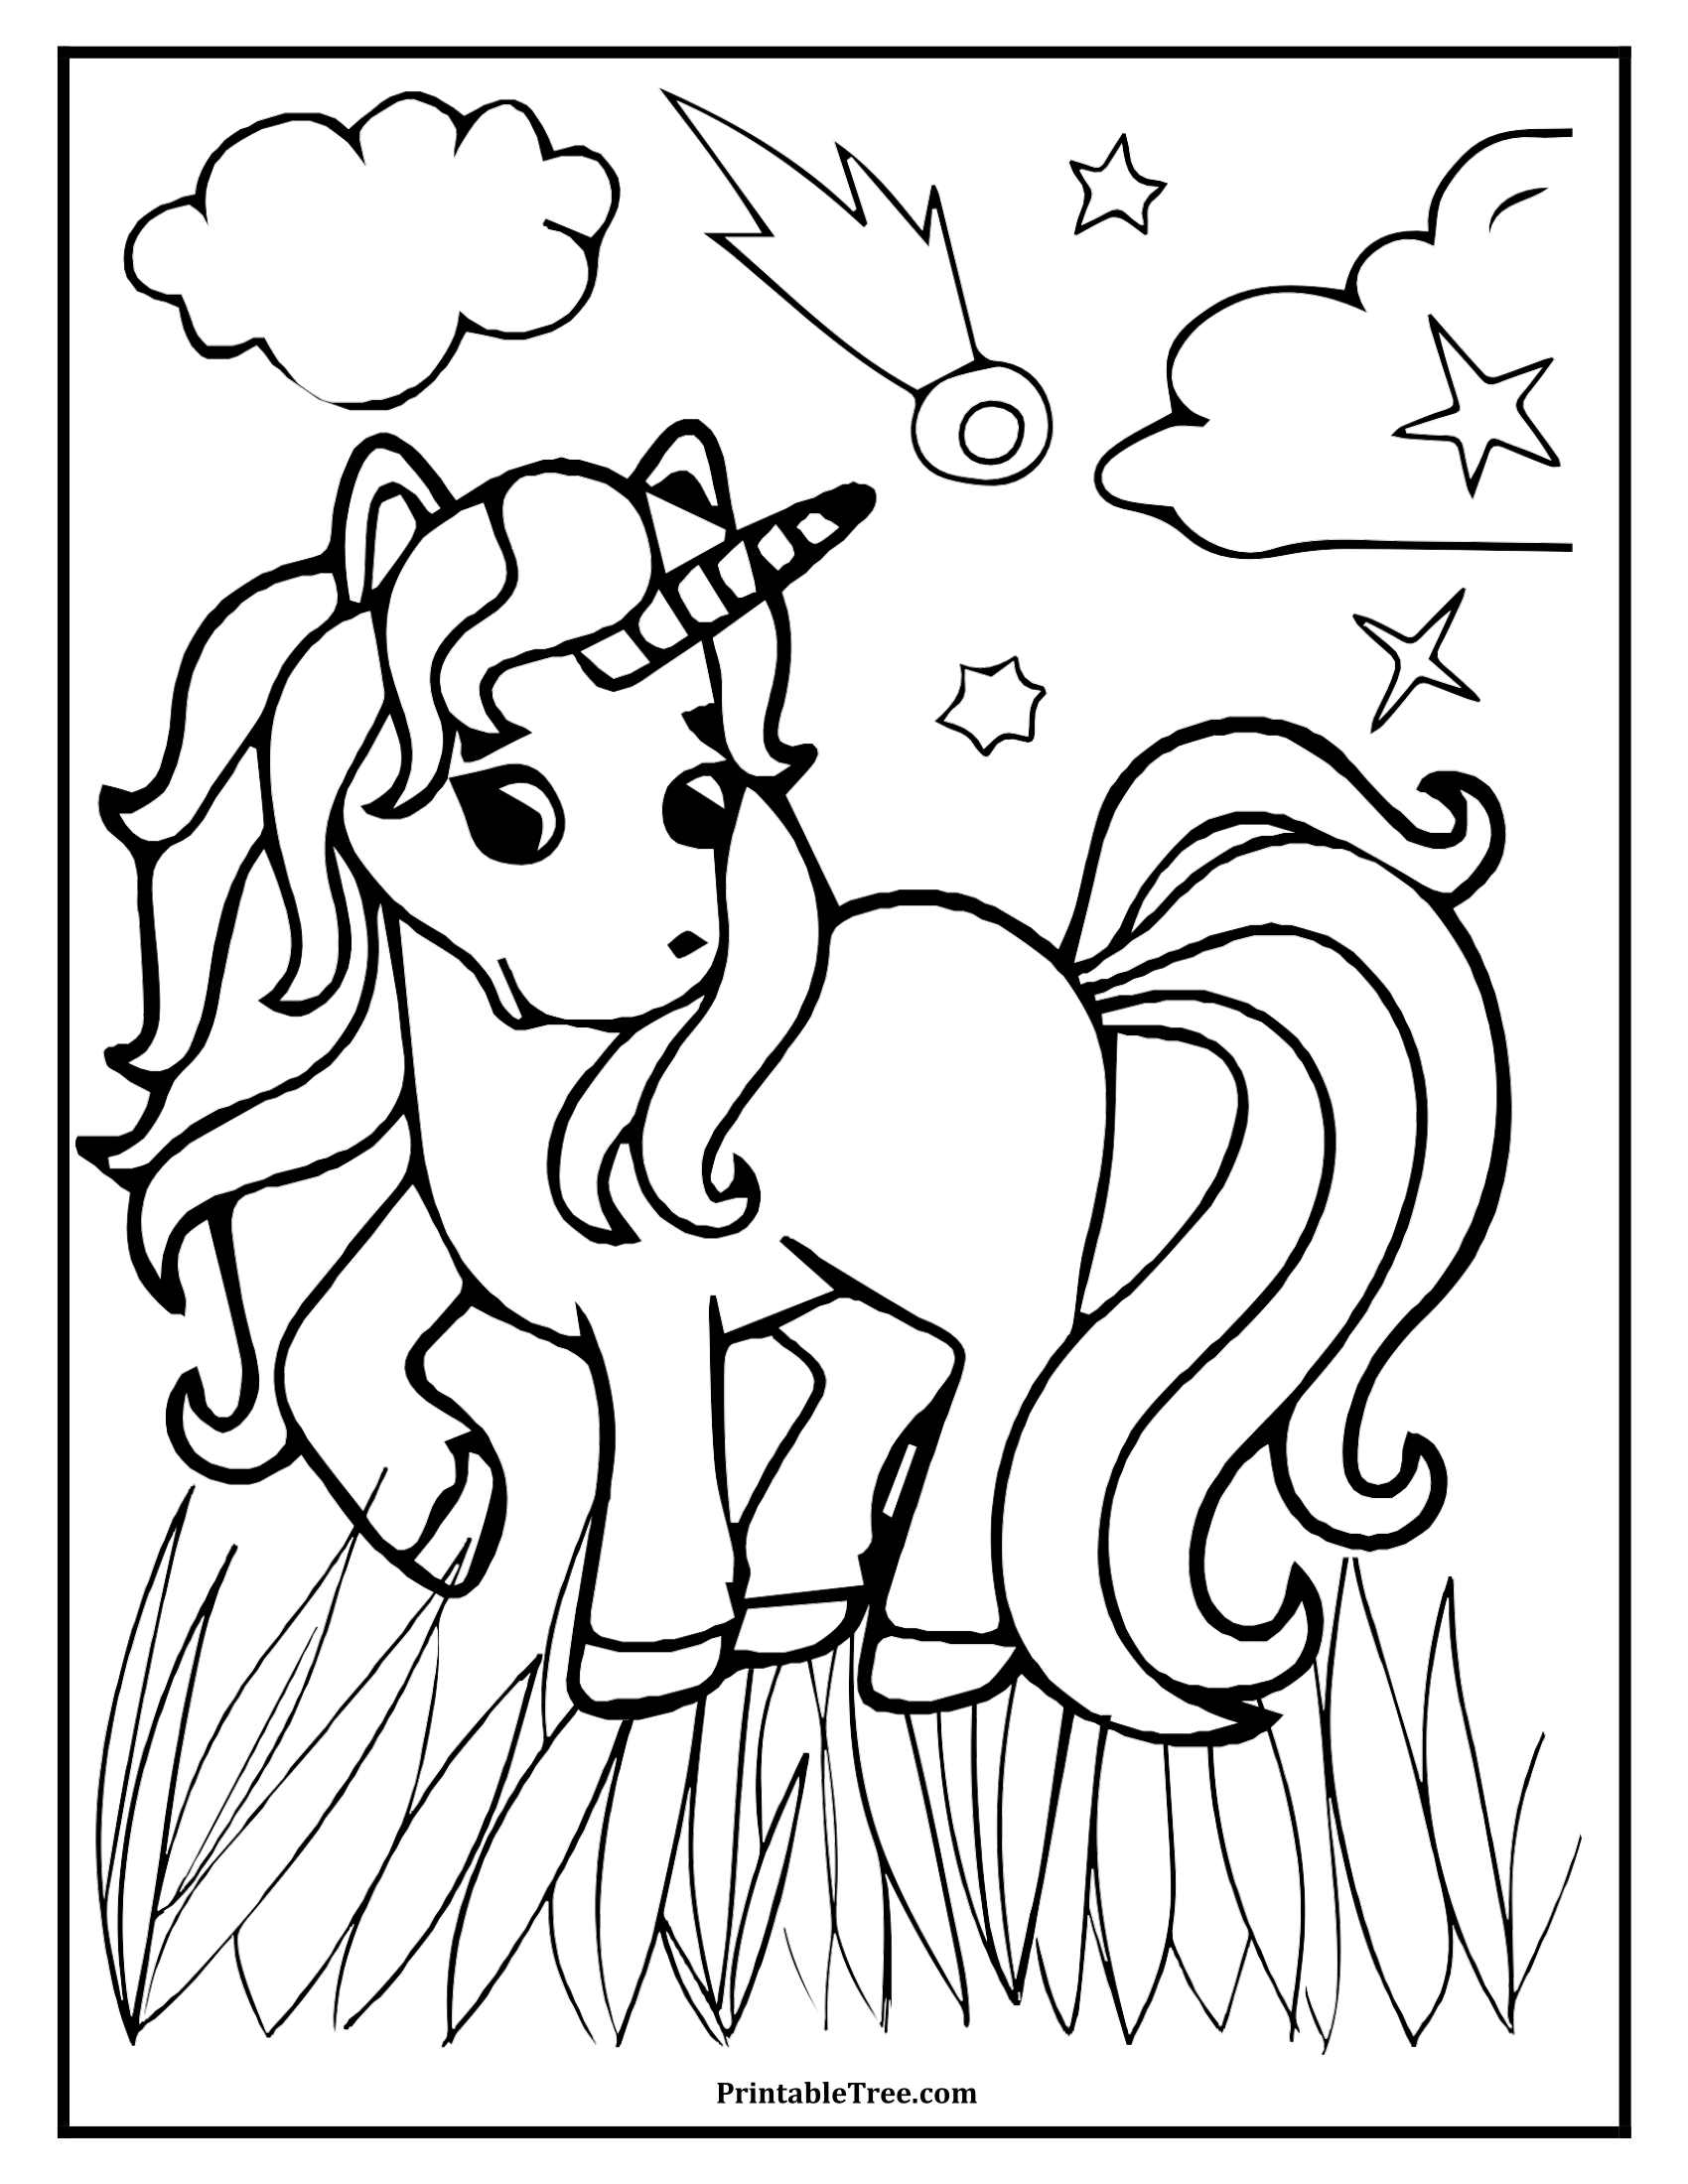 Free printable unicorn coloring pages pdf for kids and adults